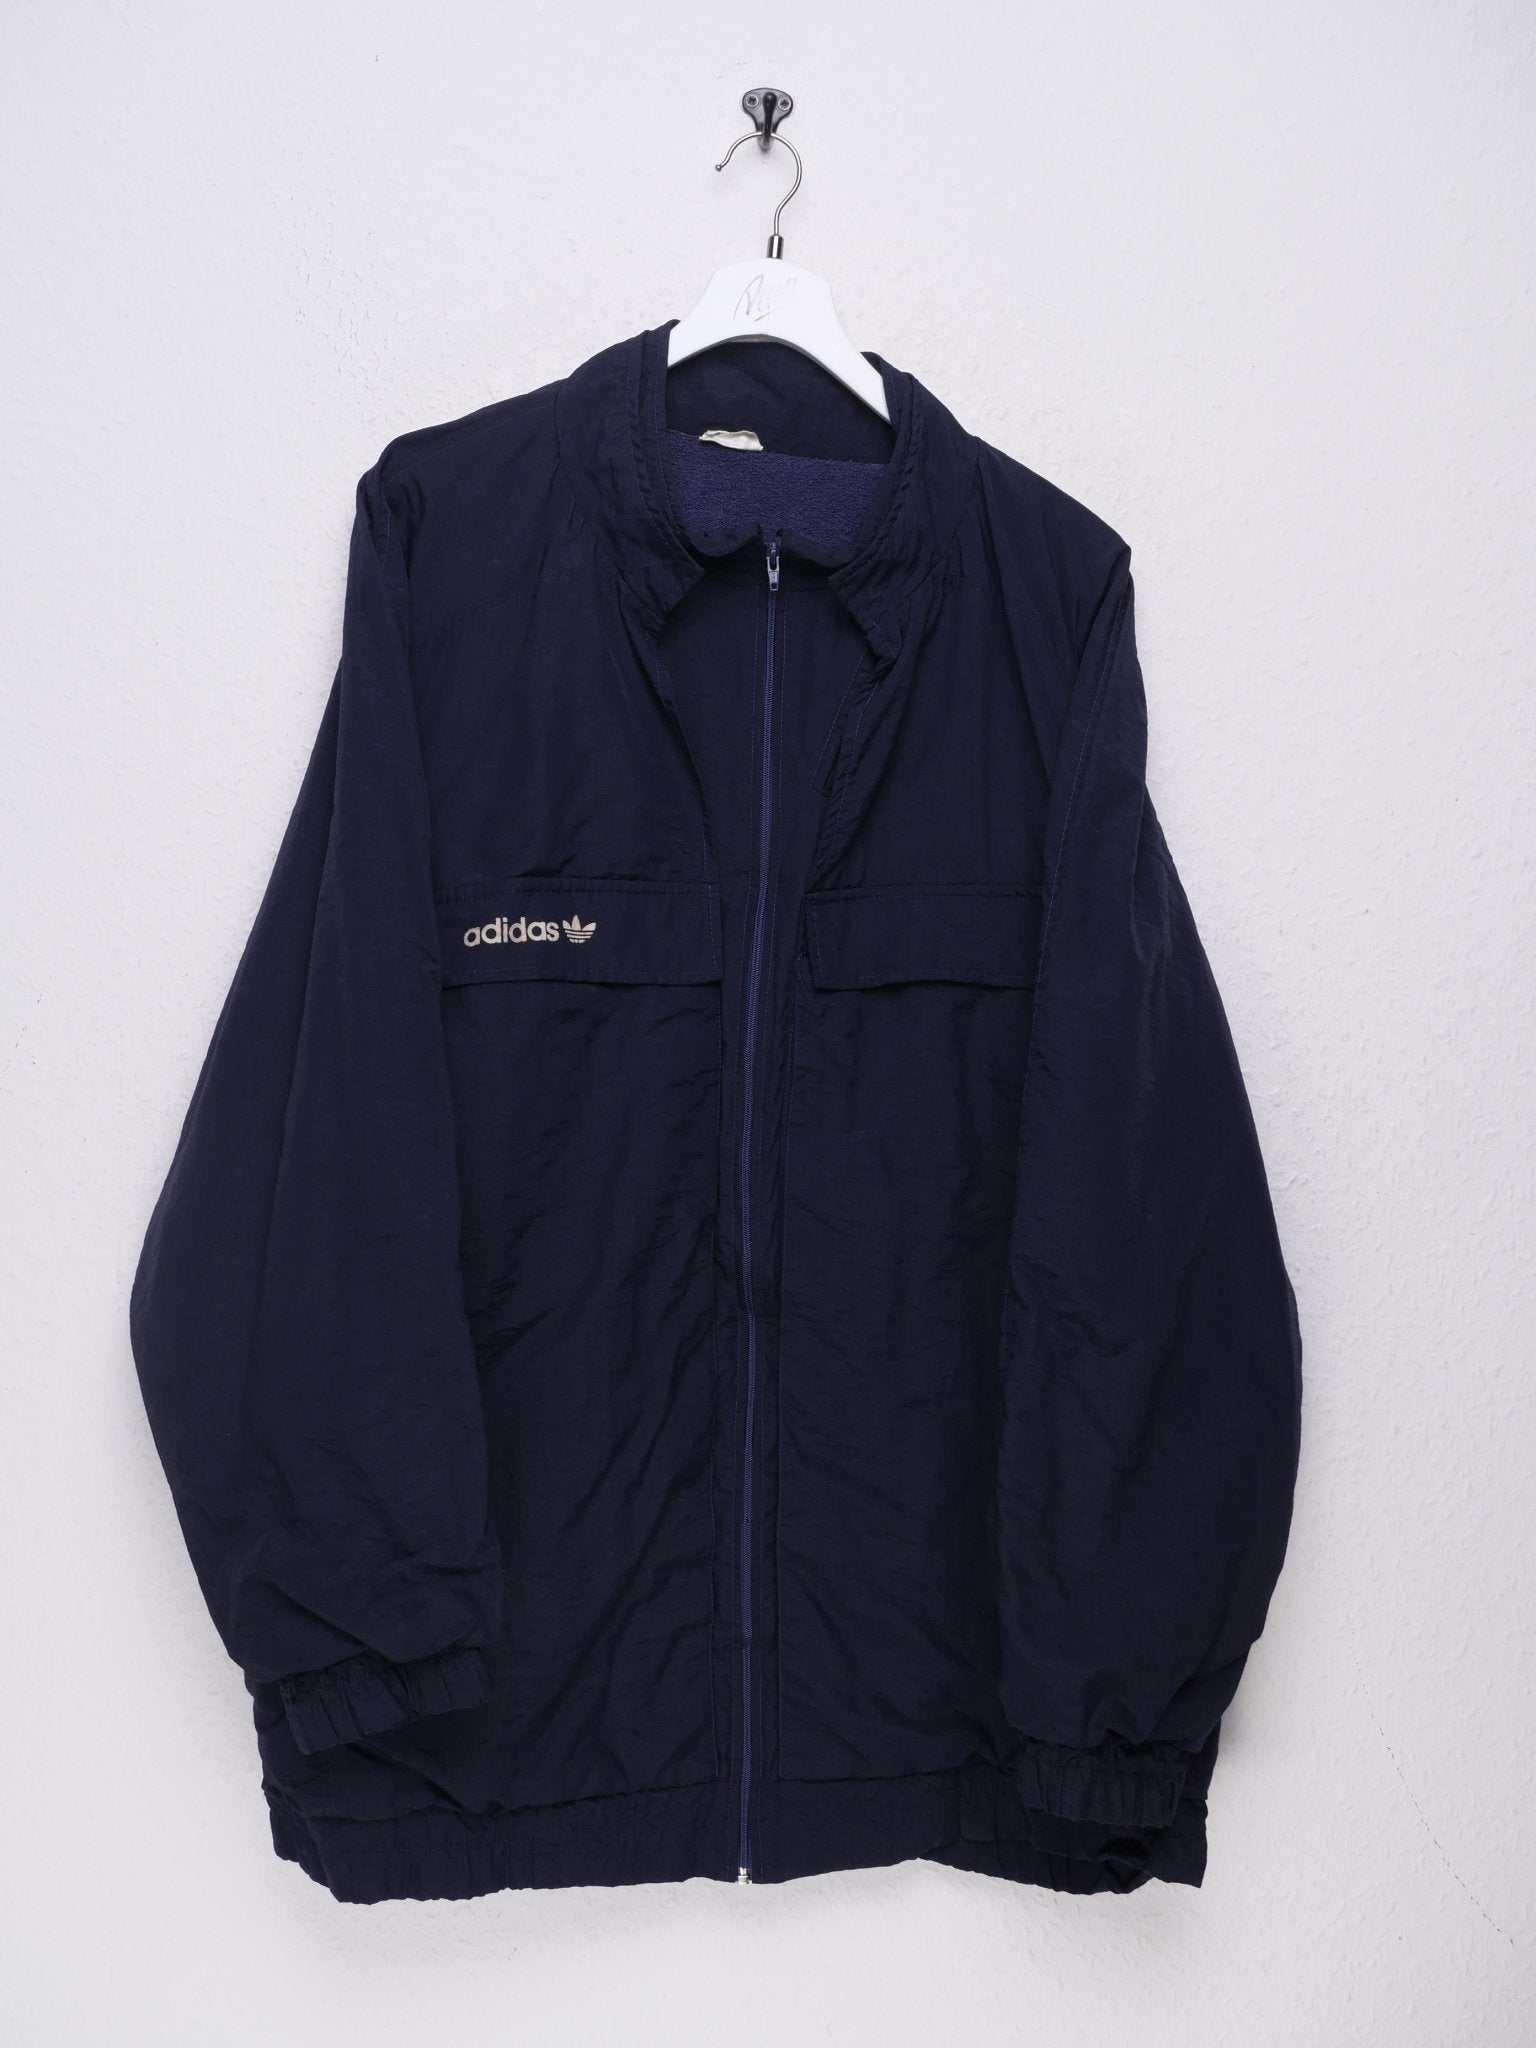 Adidas embroidered Logo navy thick Track Jacket - Peeces